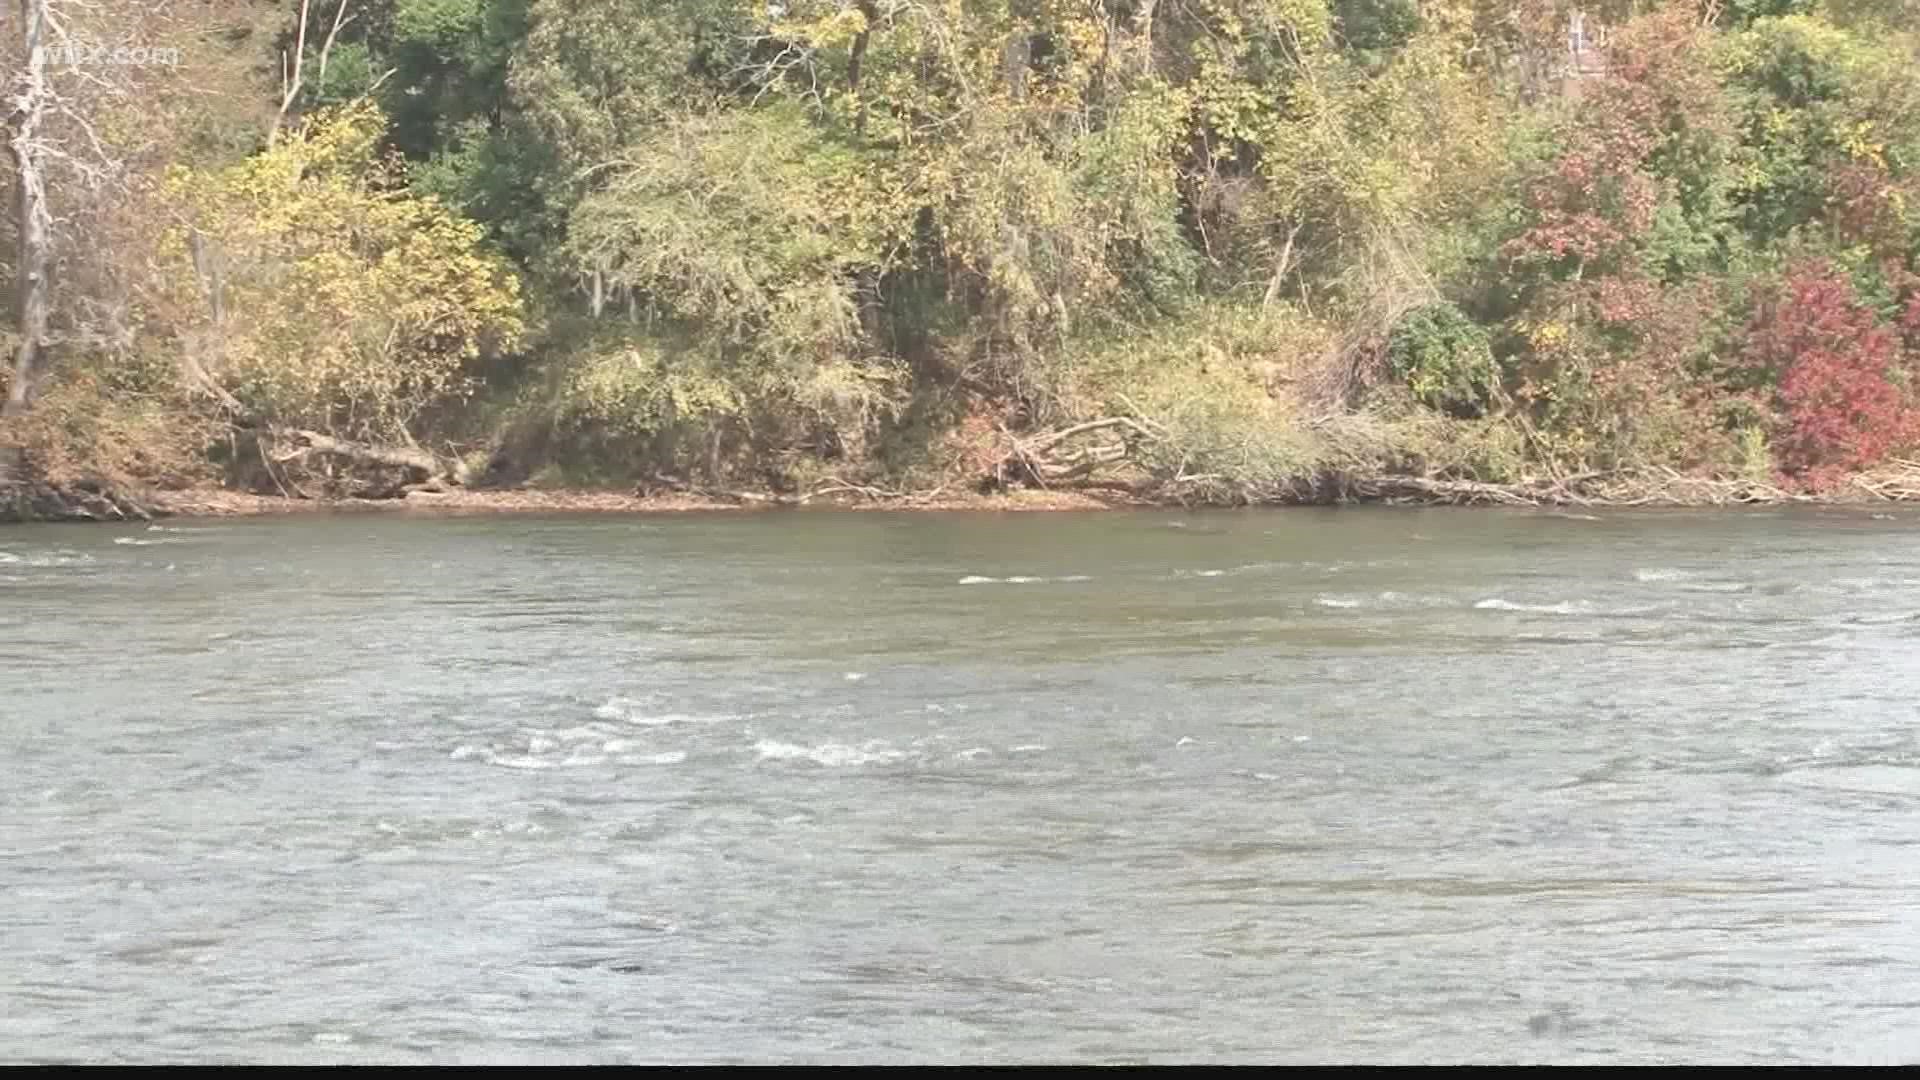 The SC Department of Natural Resources (DNR) is  partnering with a number of other stakeholders to create a plan for the Saluda River Basin.